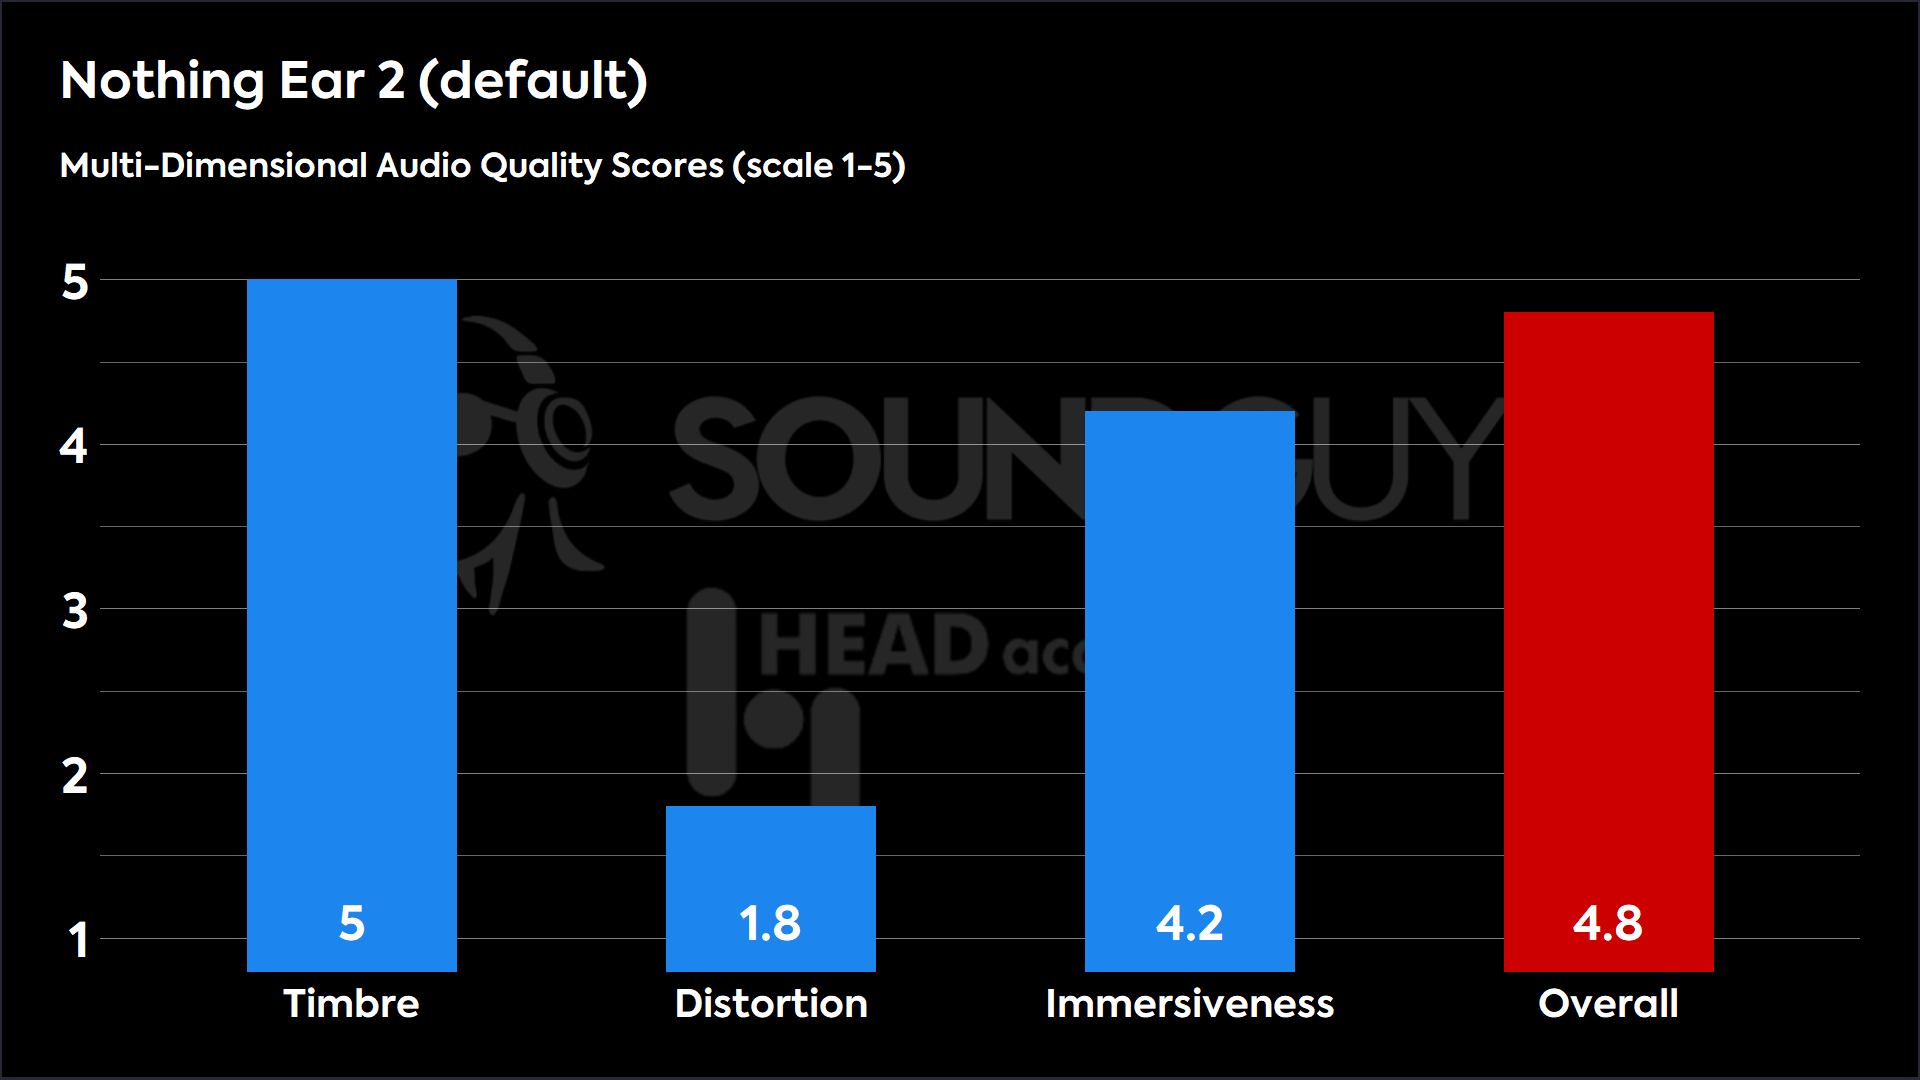 This chart shows the MDAQS results for the Nothing Ear 2 in default mode. The Timbre score is 5, The Distortion score is 1.8, the Immersiveness score is 4.2, and the Overall Score is 4.8).